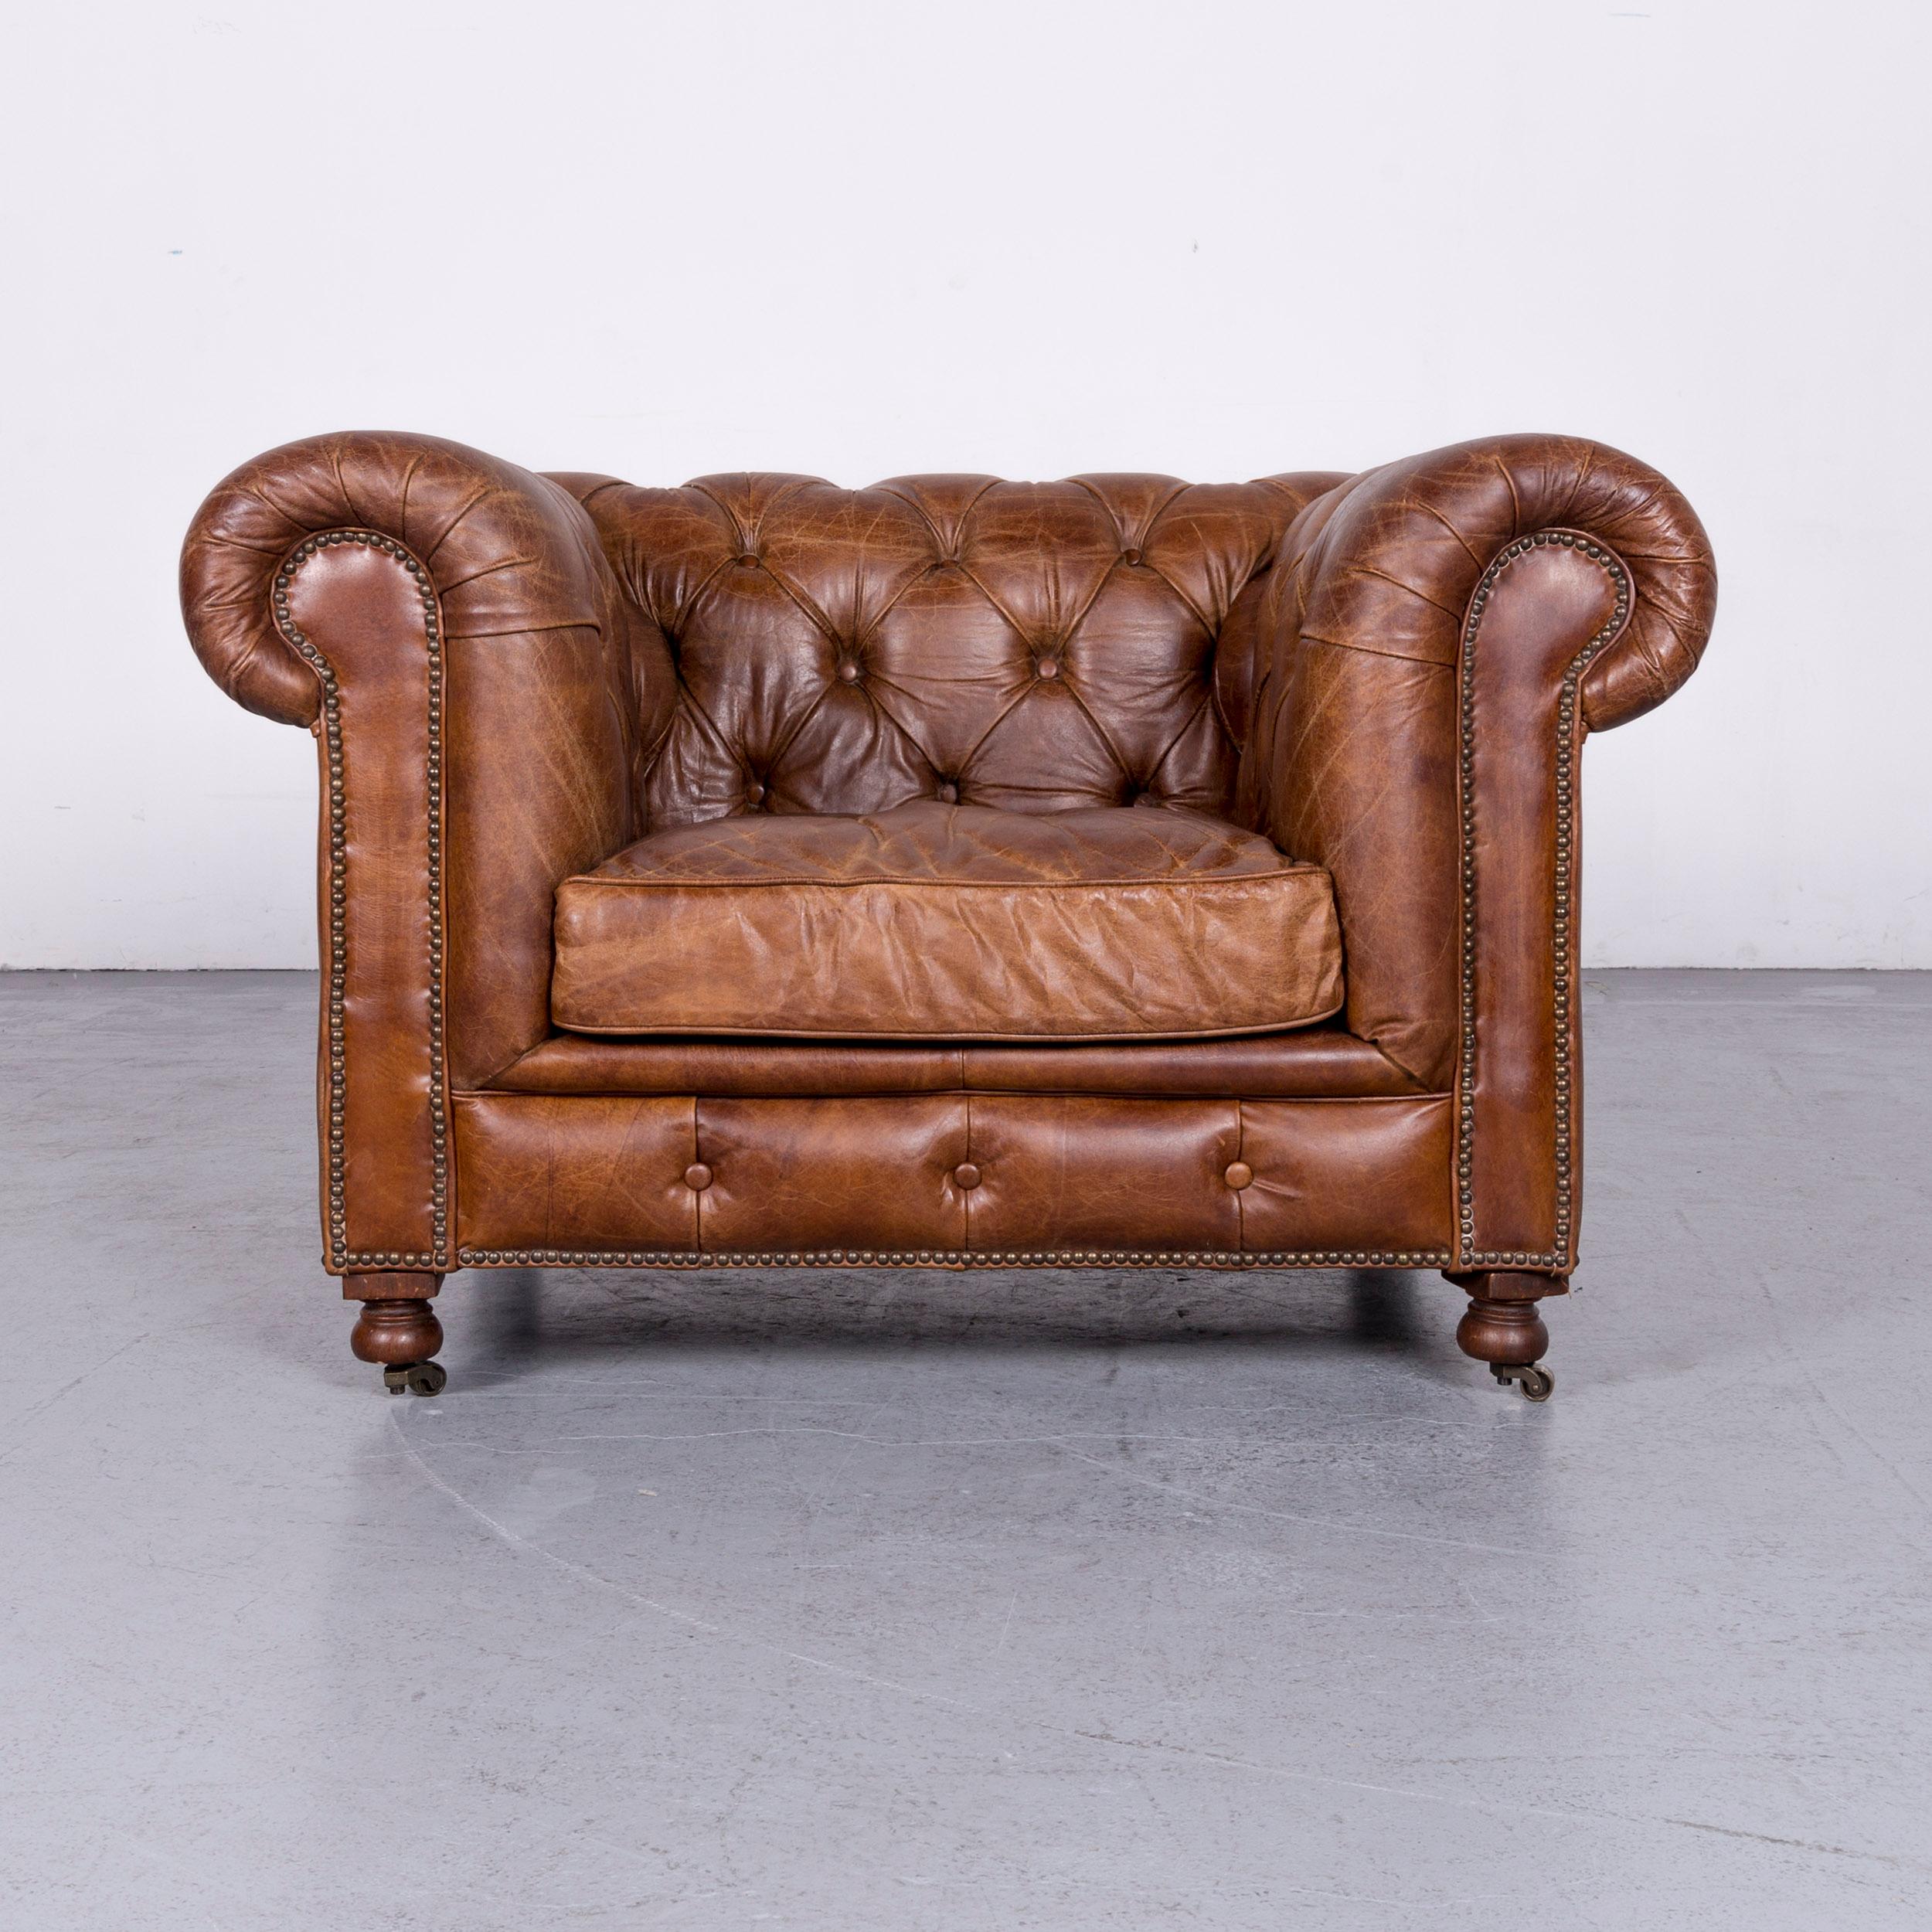 We bring to you a vintage brown Chesterfield leather armchair buttoned club chair in brown.